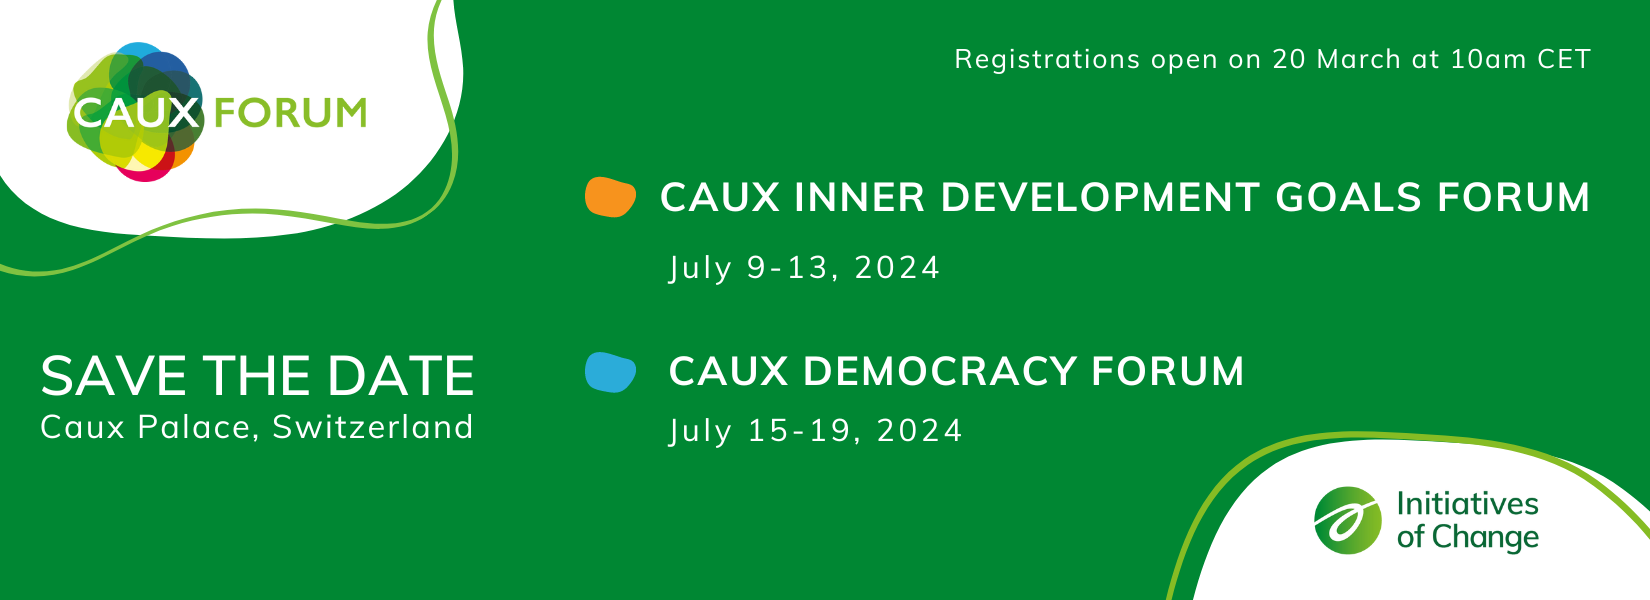 Caux Forum 2024 Save the Date banner EN green